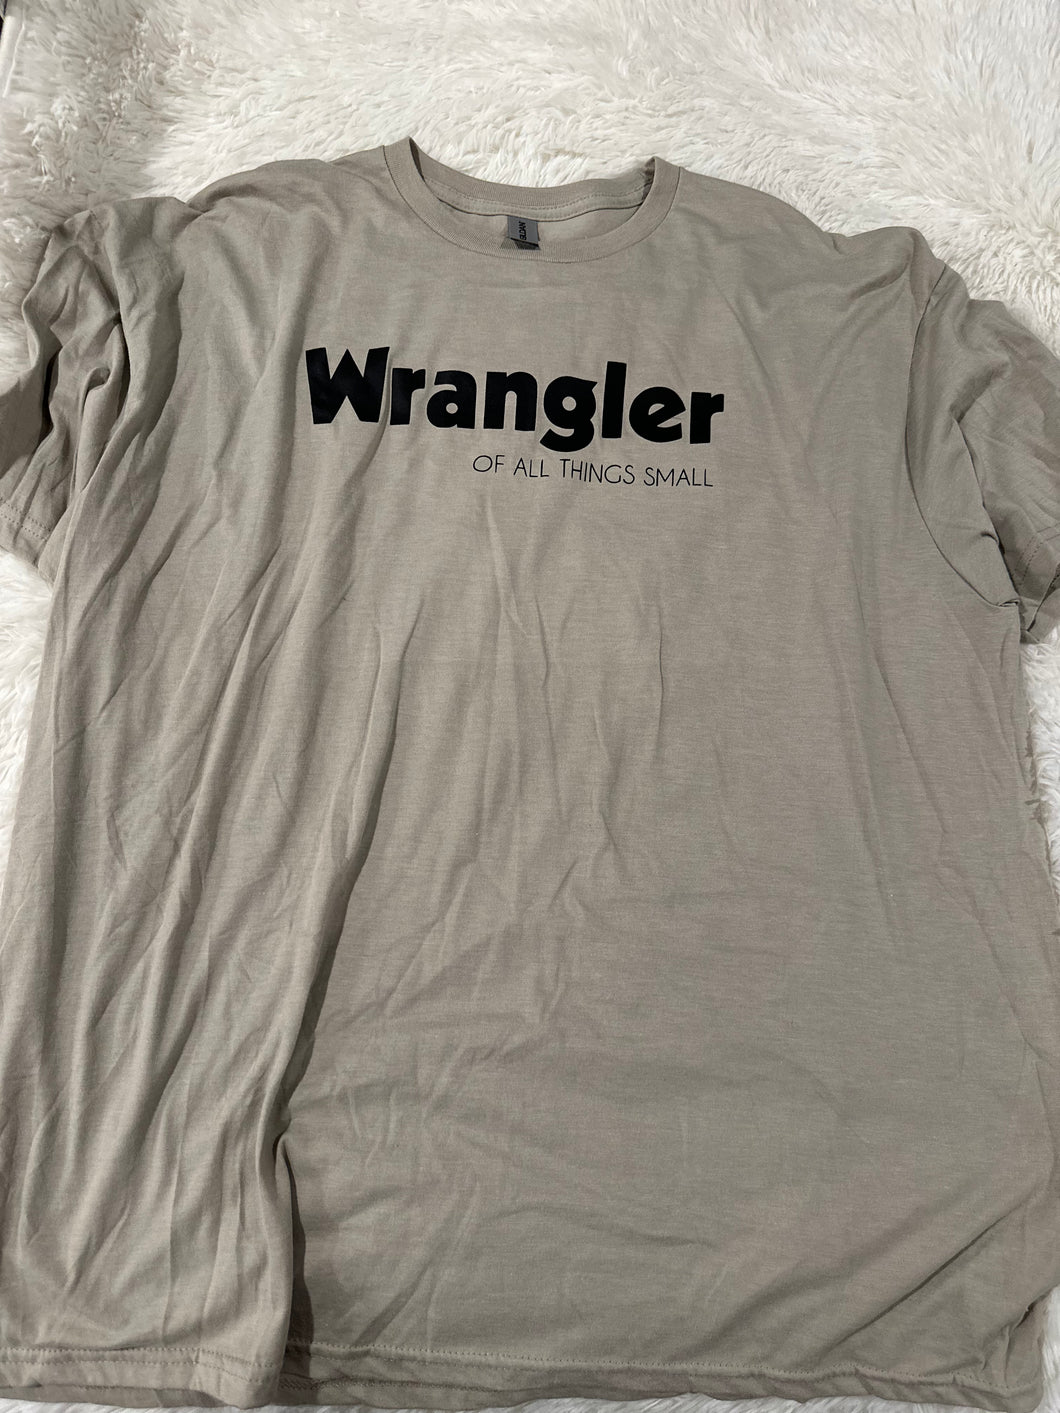 wrangler of all things small T-Shirt - 2XL